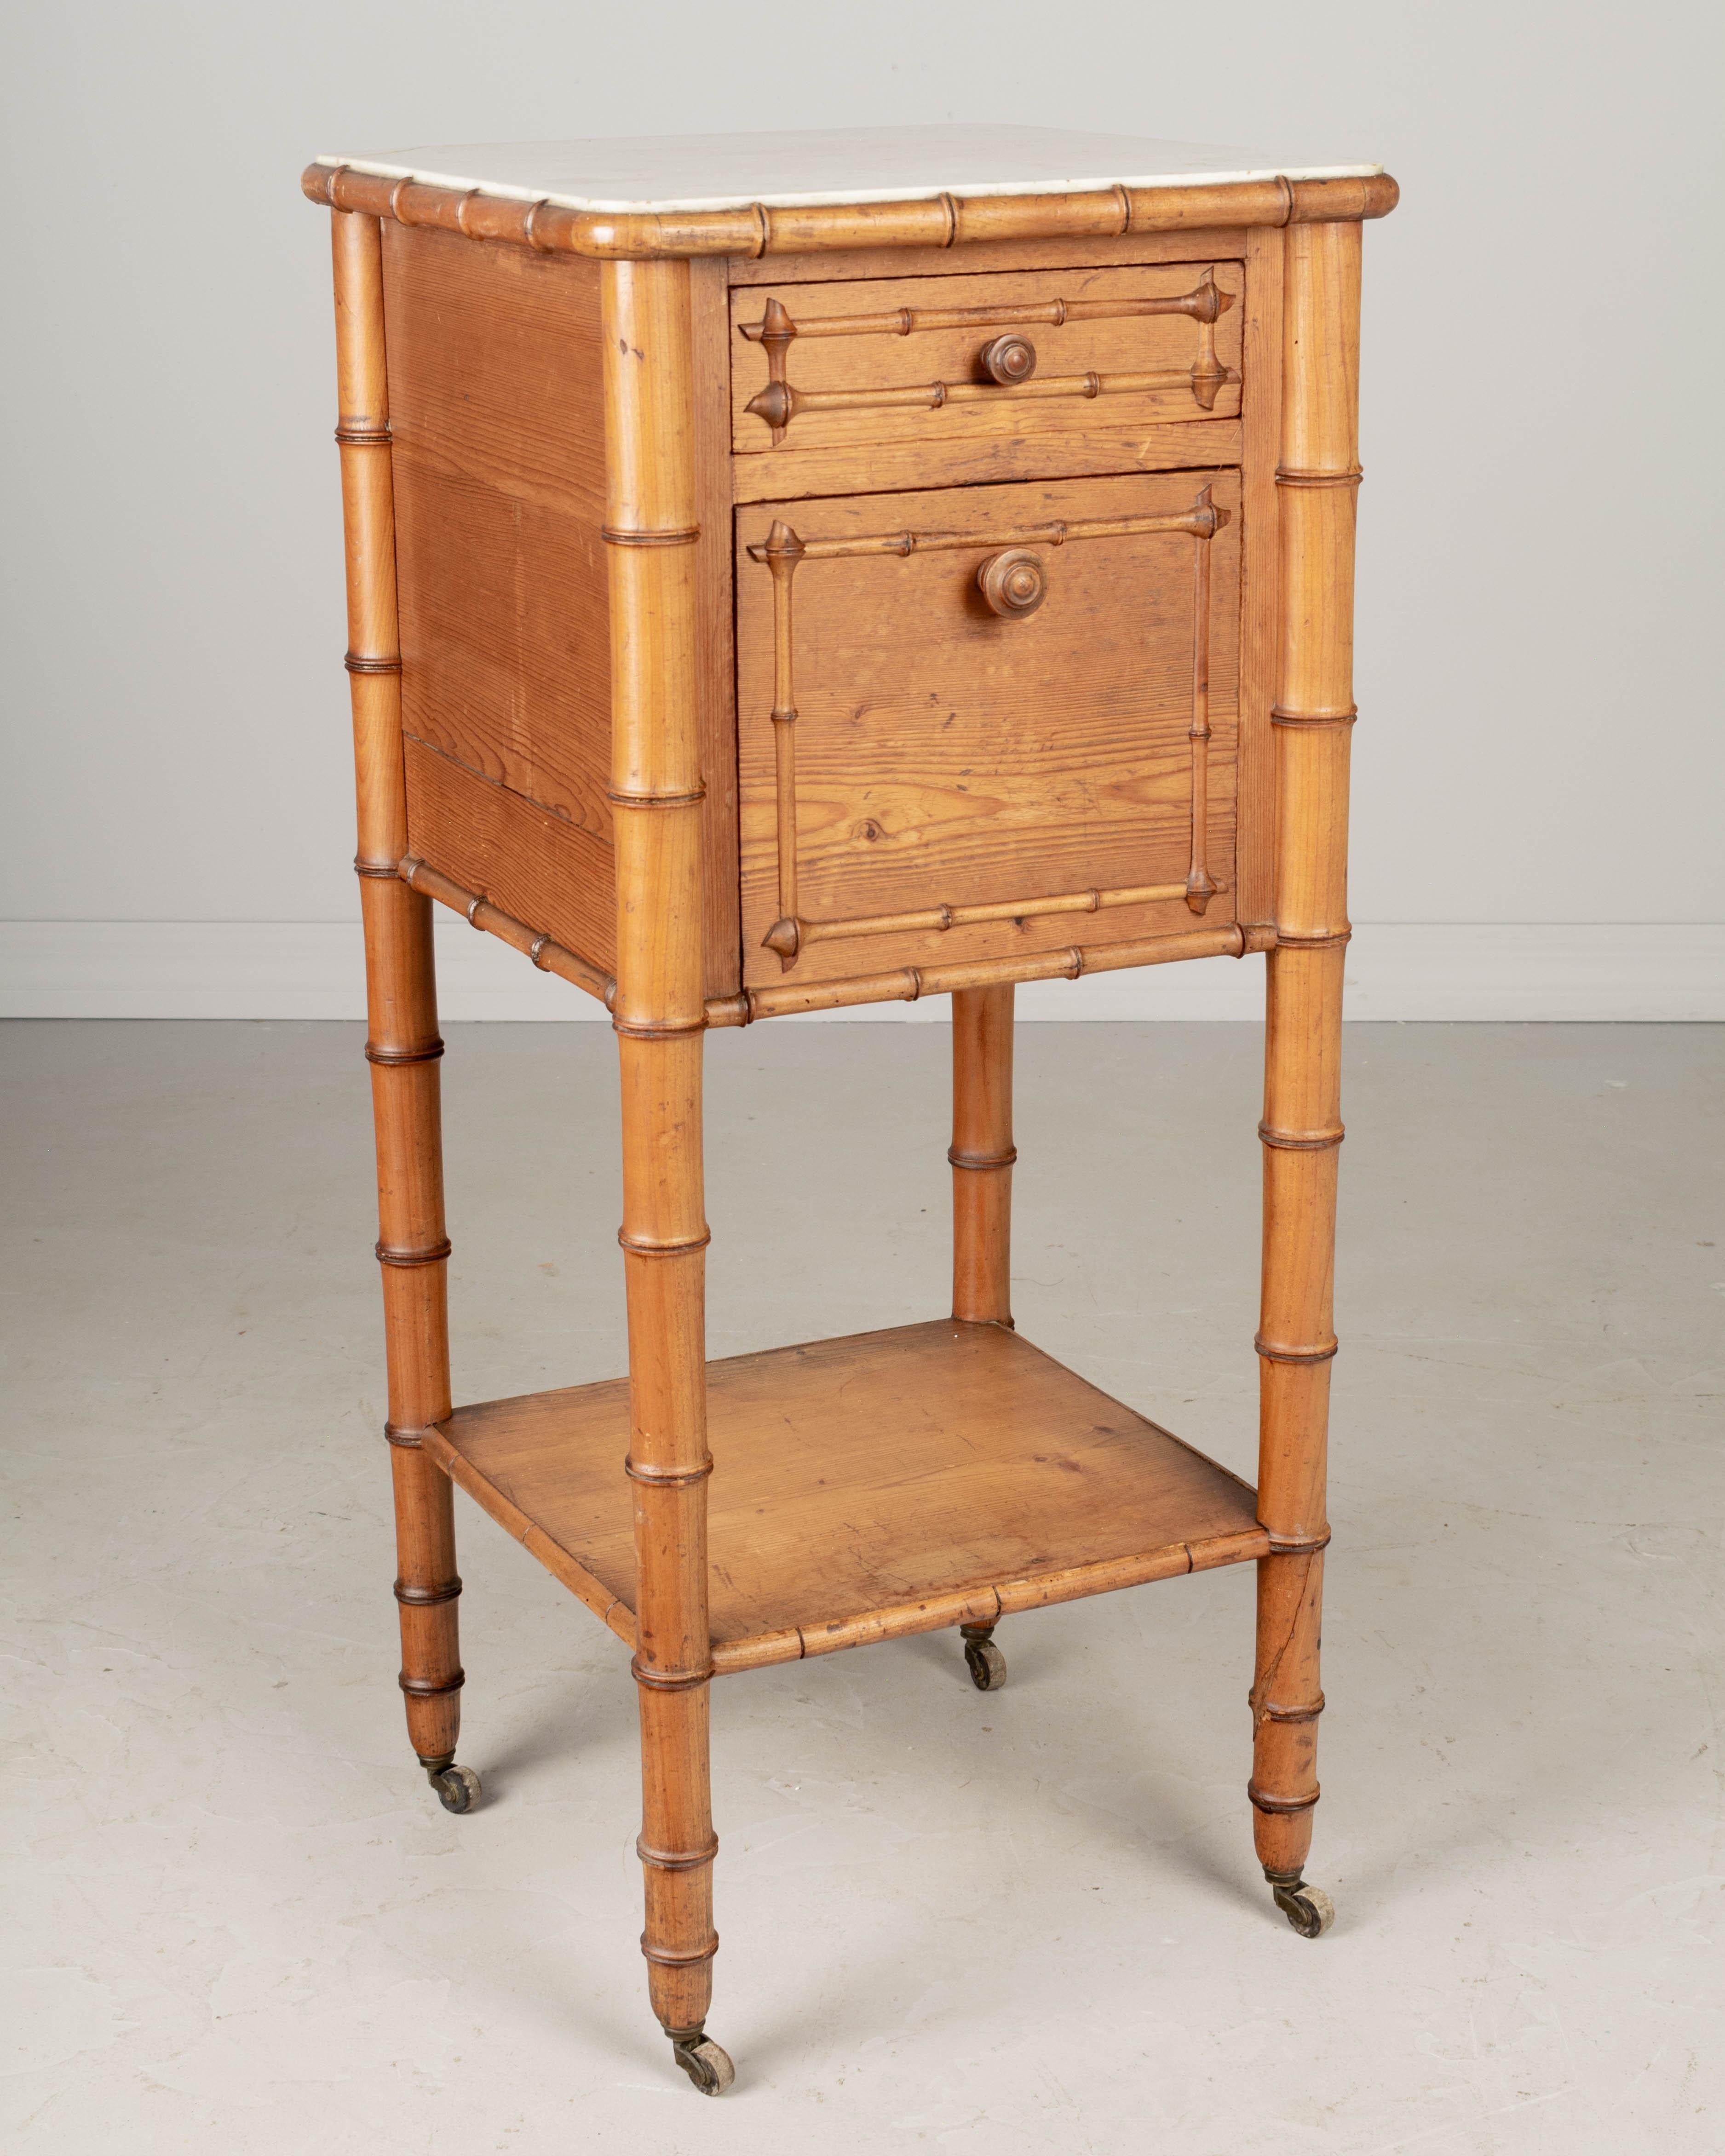 A 19th century French faux bamboo marble top bedside table, or nightstand made of pine. Dovetailed drawer and a door that hinges open to reveal a marble lined interior compartment. Turned legs with castors. Inset white marble top with curved